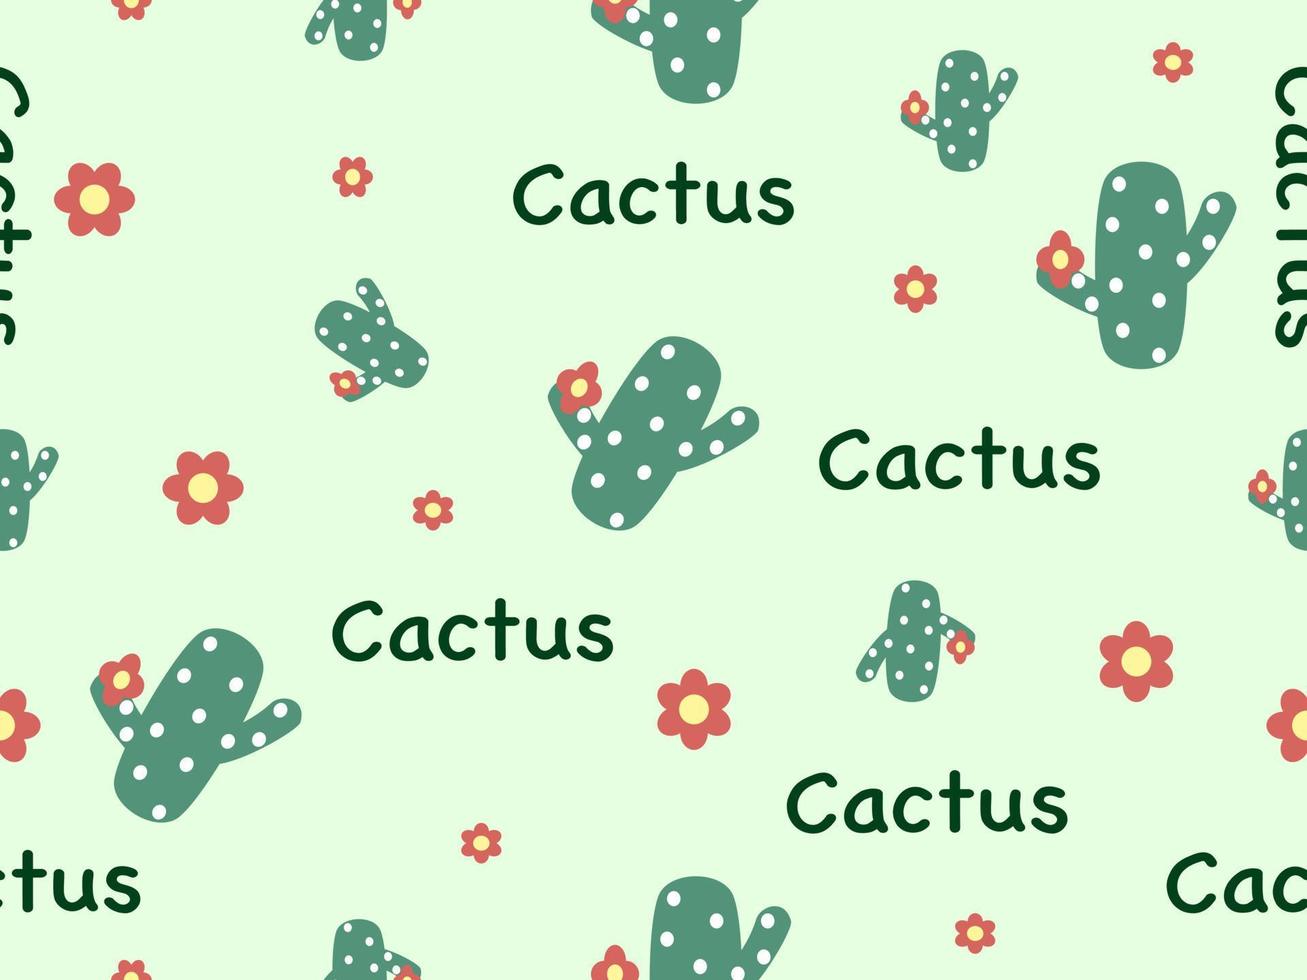 Cactus cartoon character seamless pattern on green background.Pixel style vector